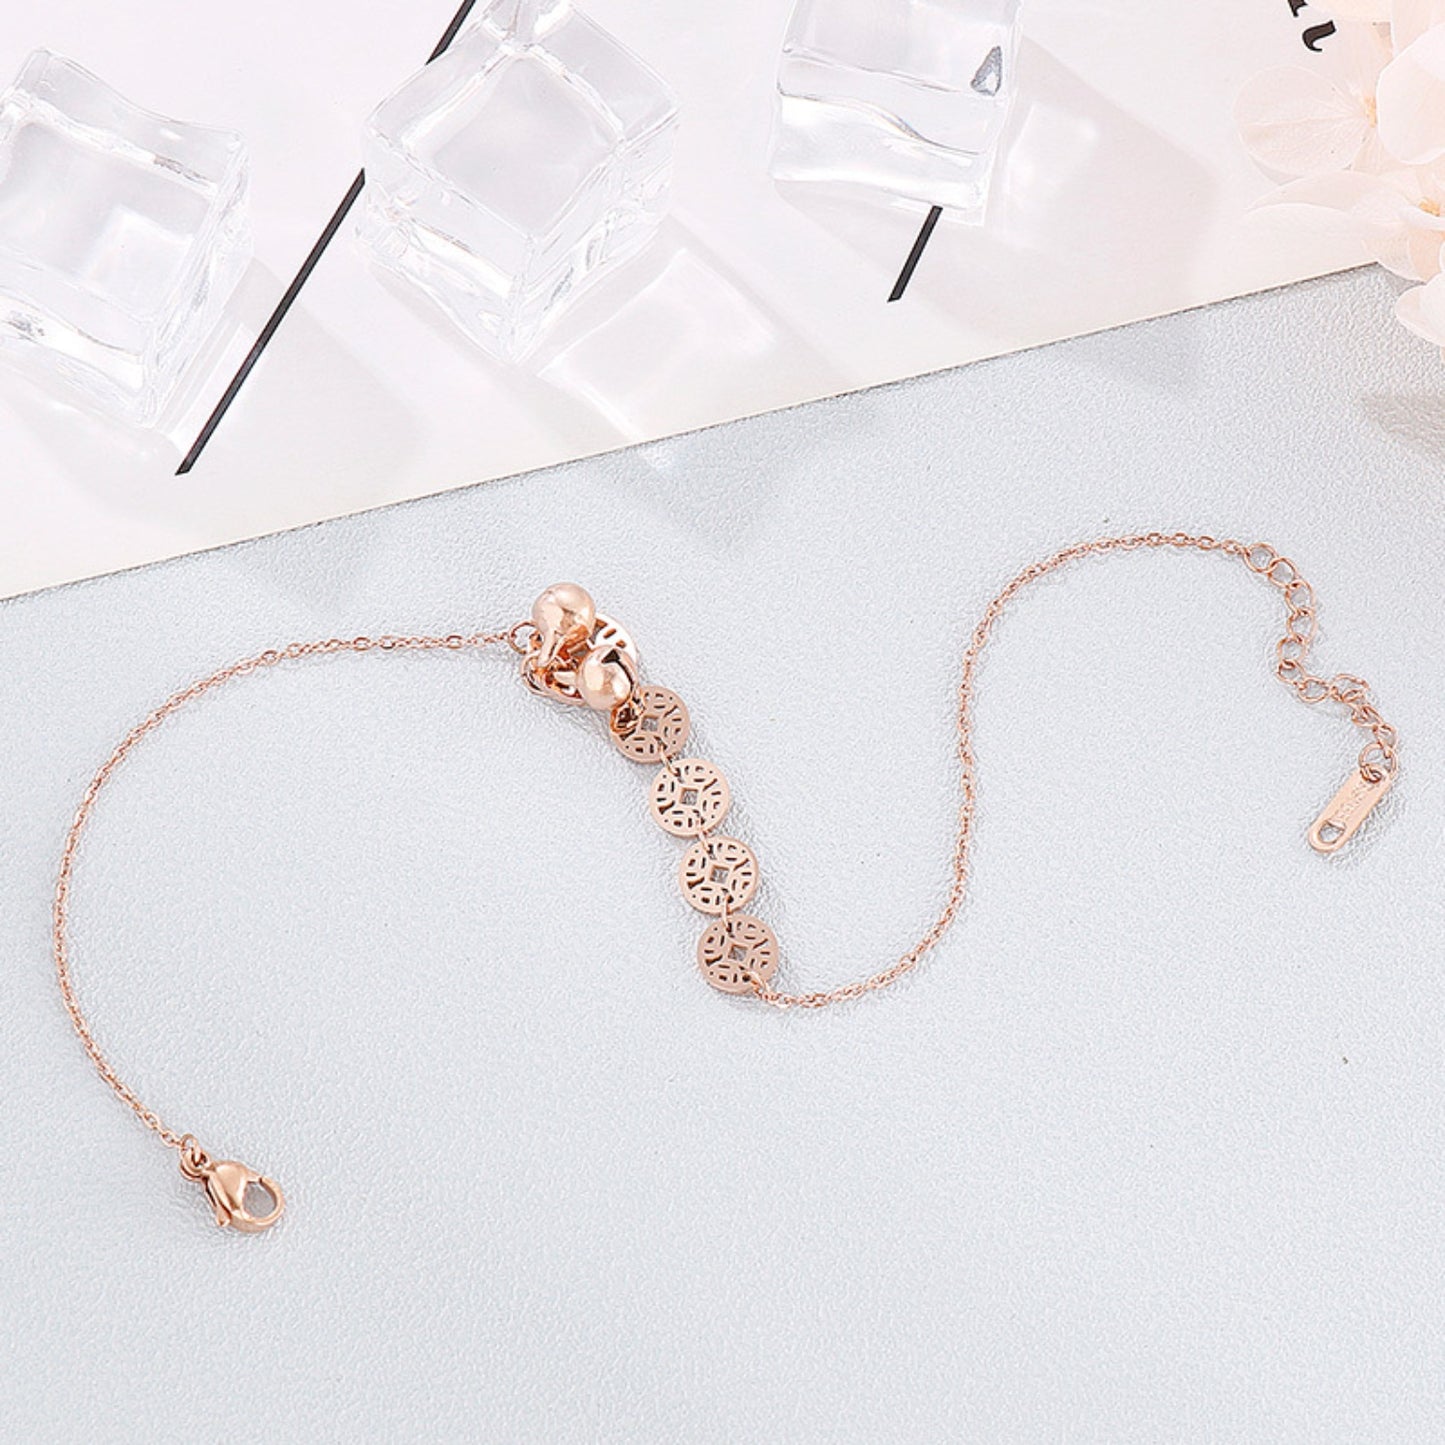 Stainless Steel Coin Shape Anklet Bracelet Rose Gold One Size